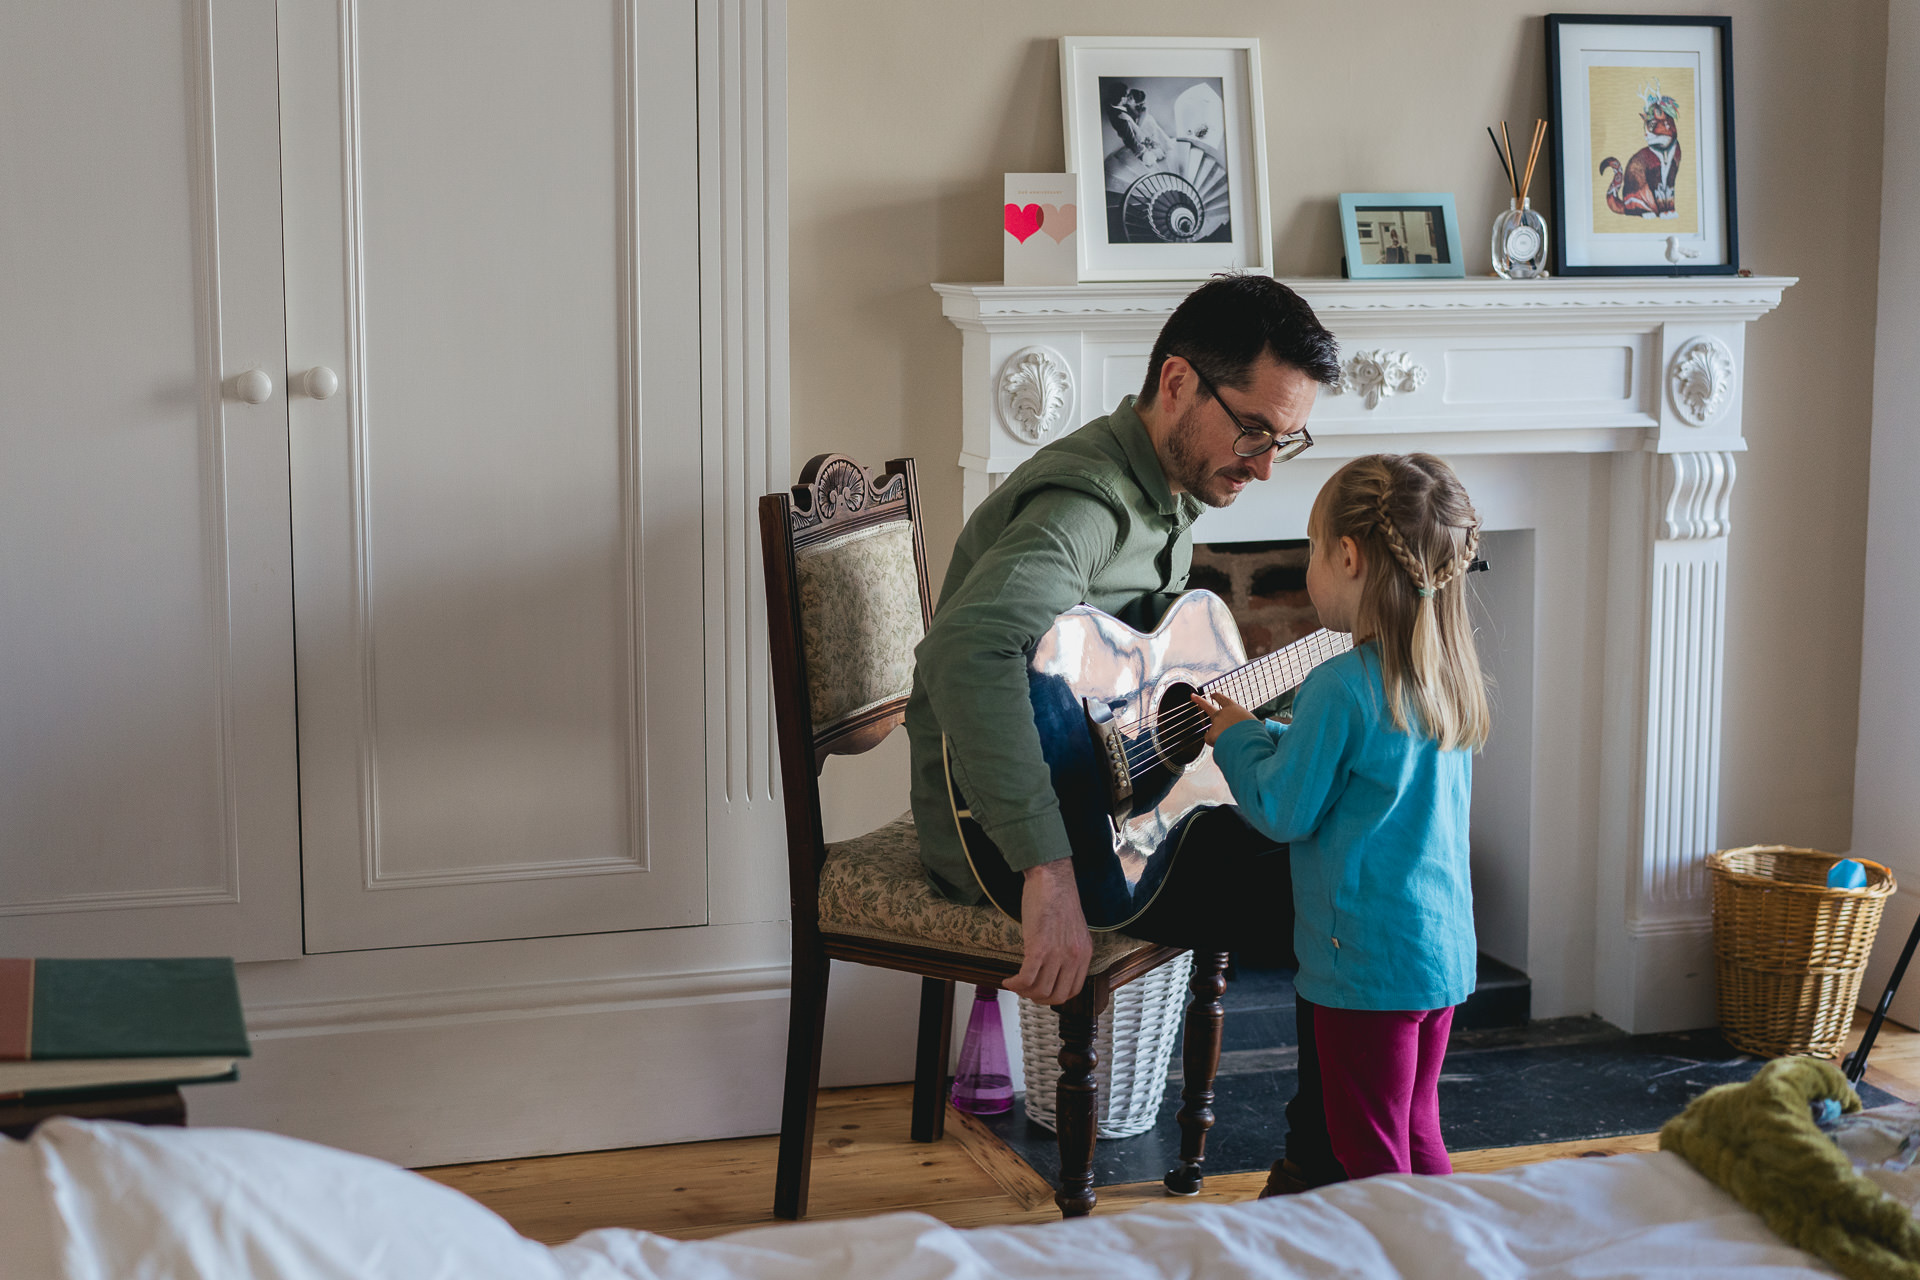 A dad playing guitar with a young daughter